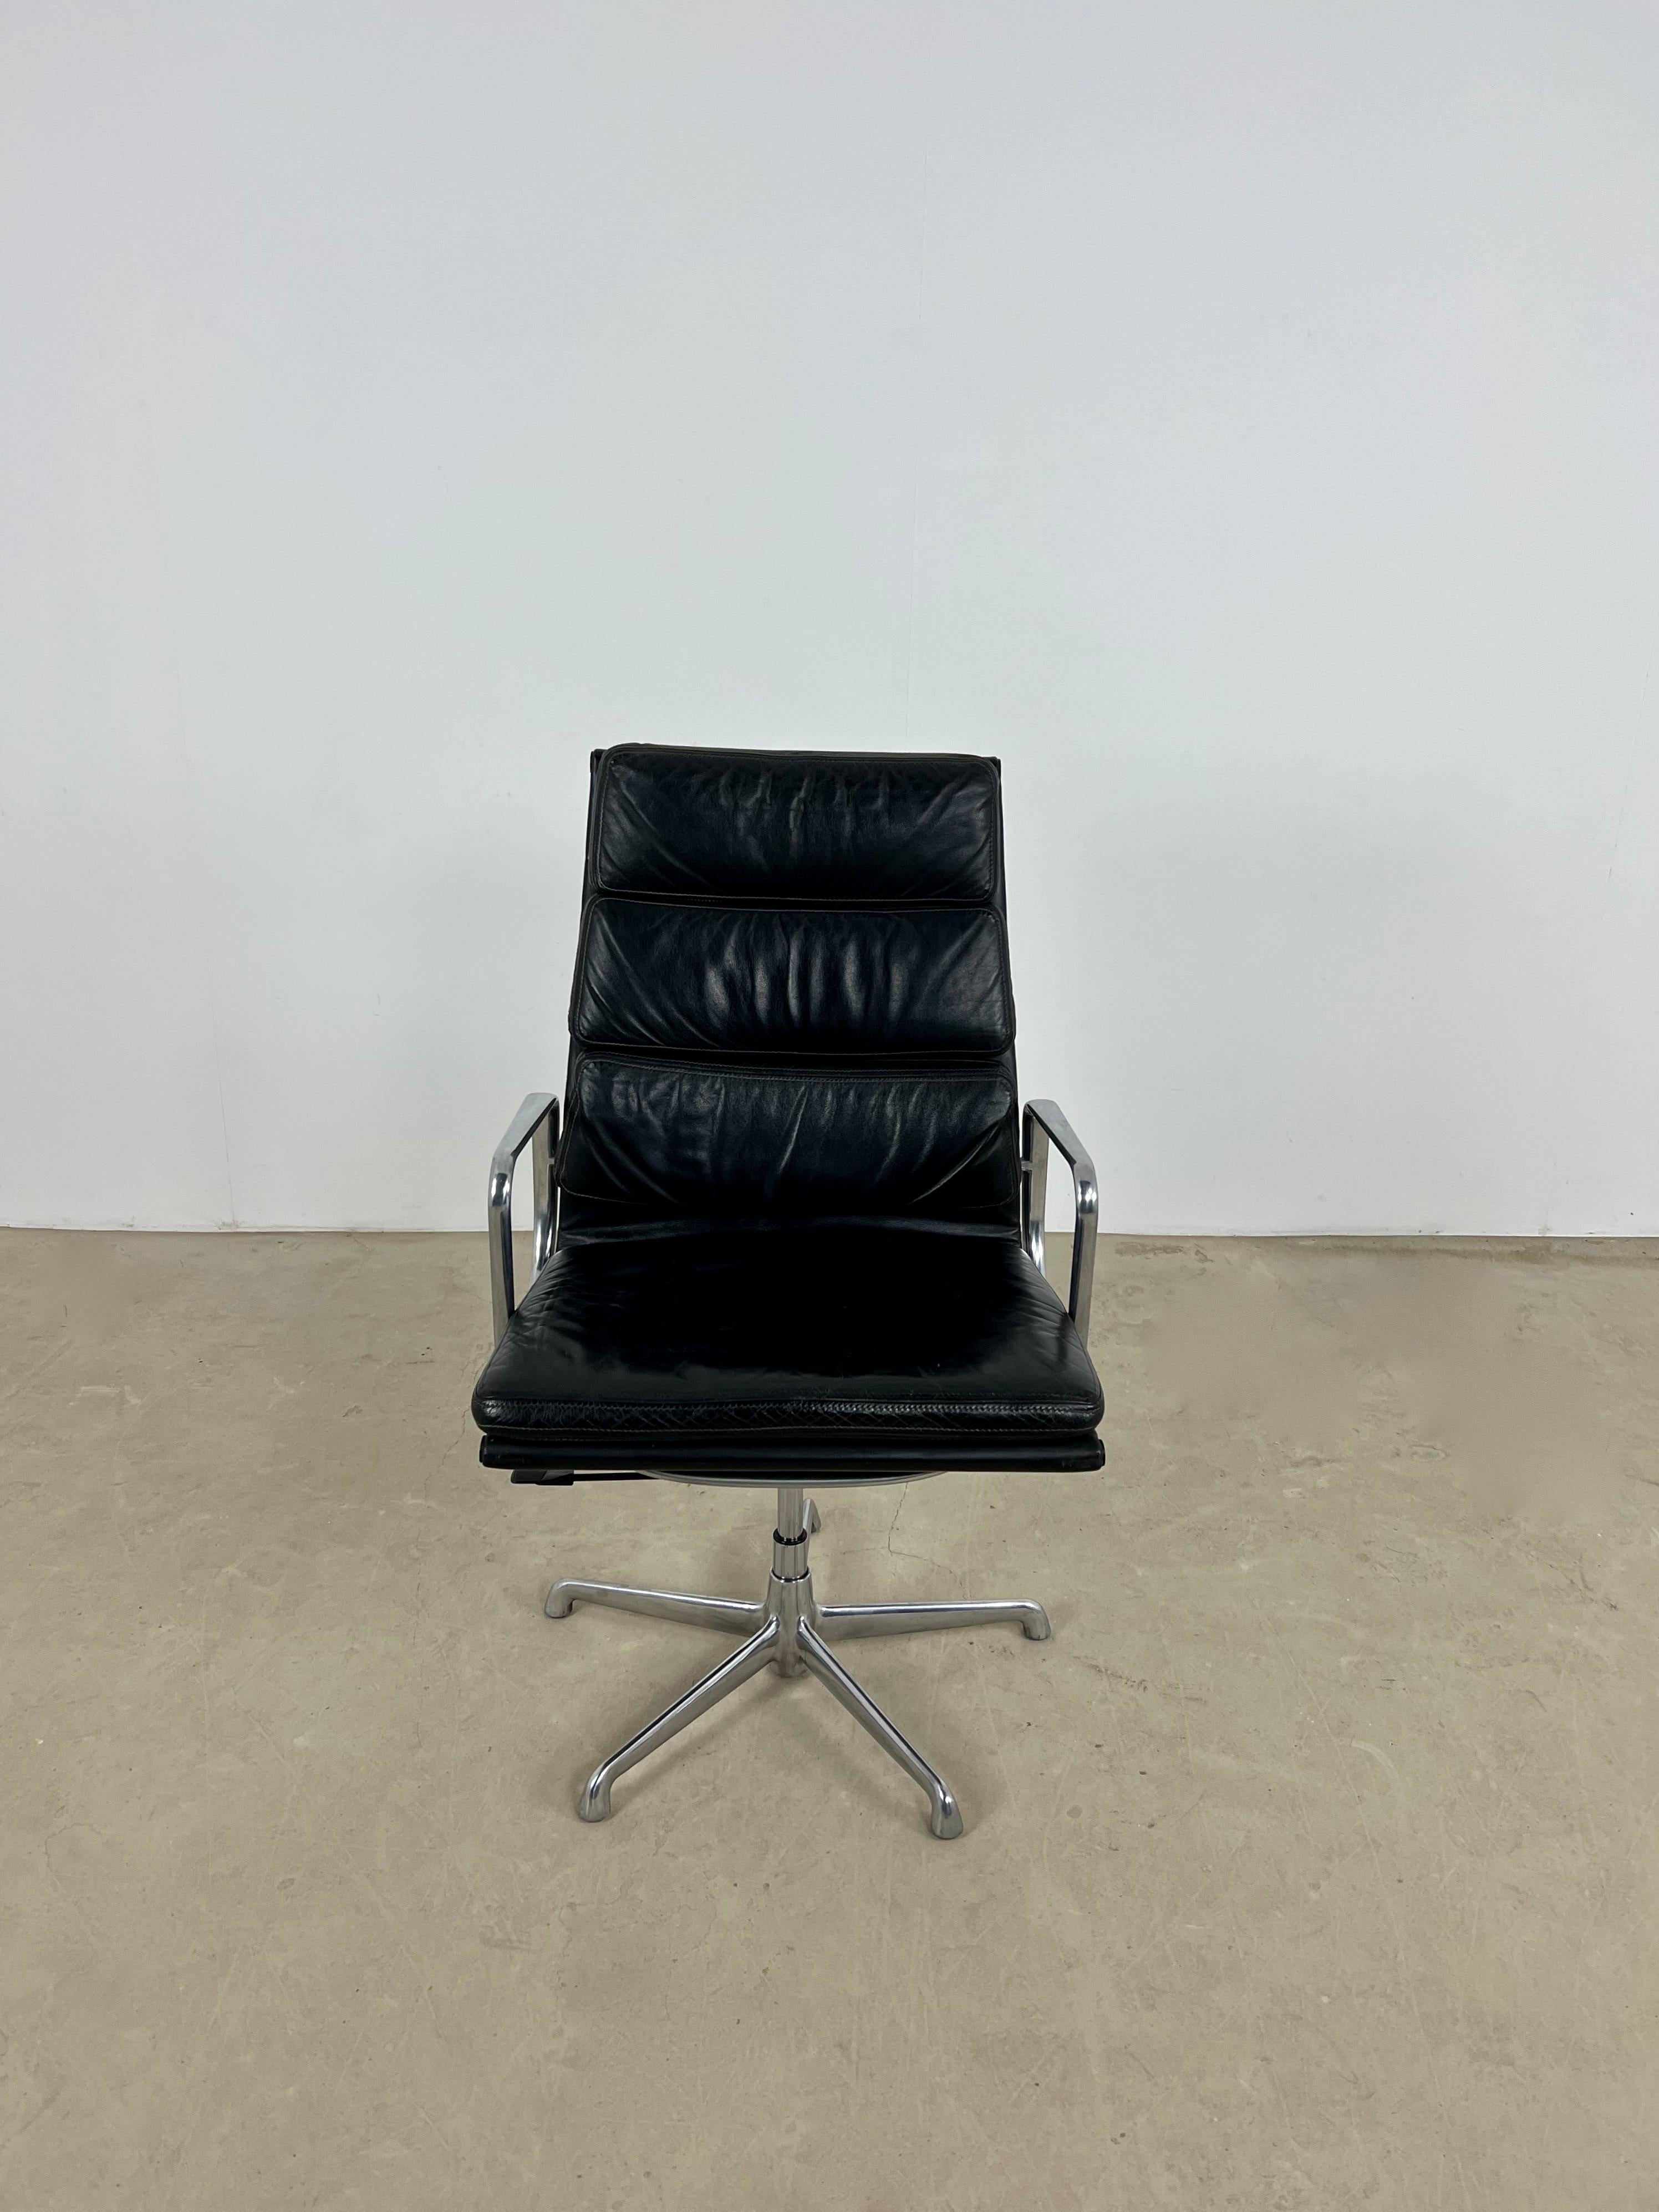 Leather armchair with aluminum base. Adjustable seat height Min: 42cm Max: 50cm. Wear due to time and age of the chair.